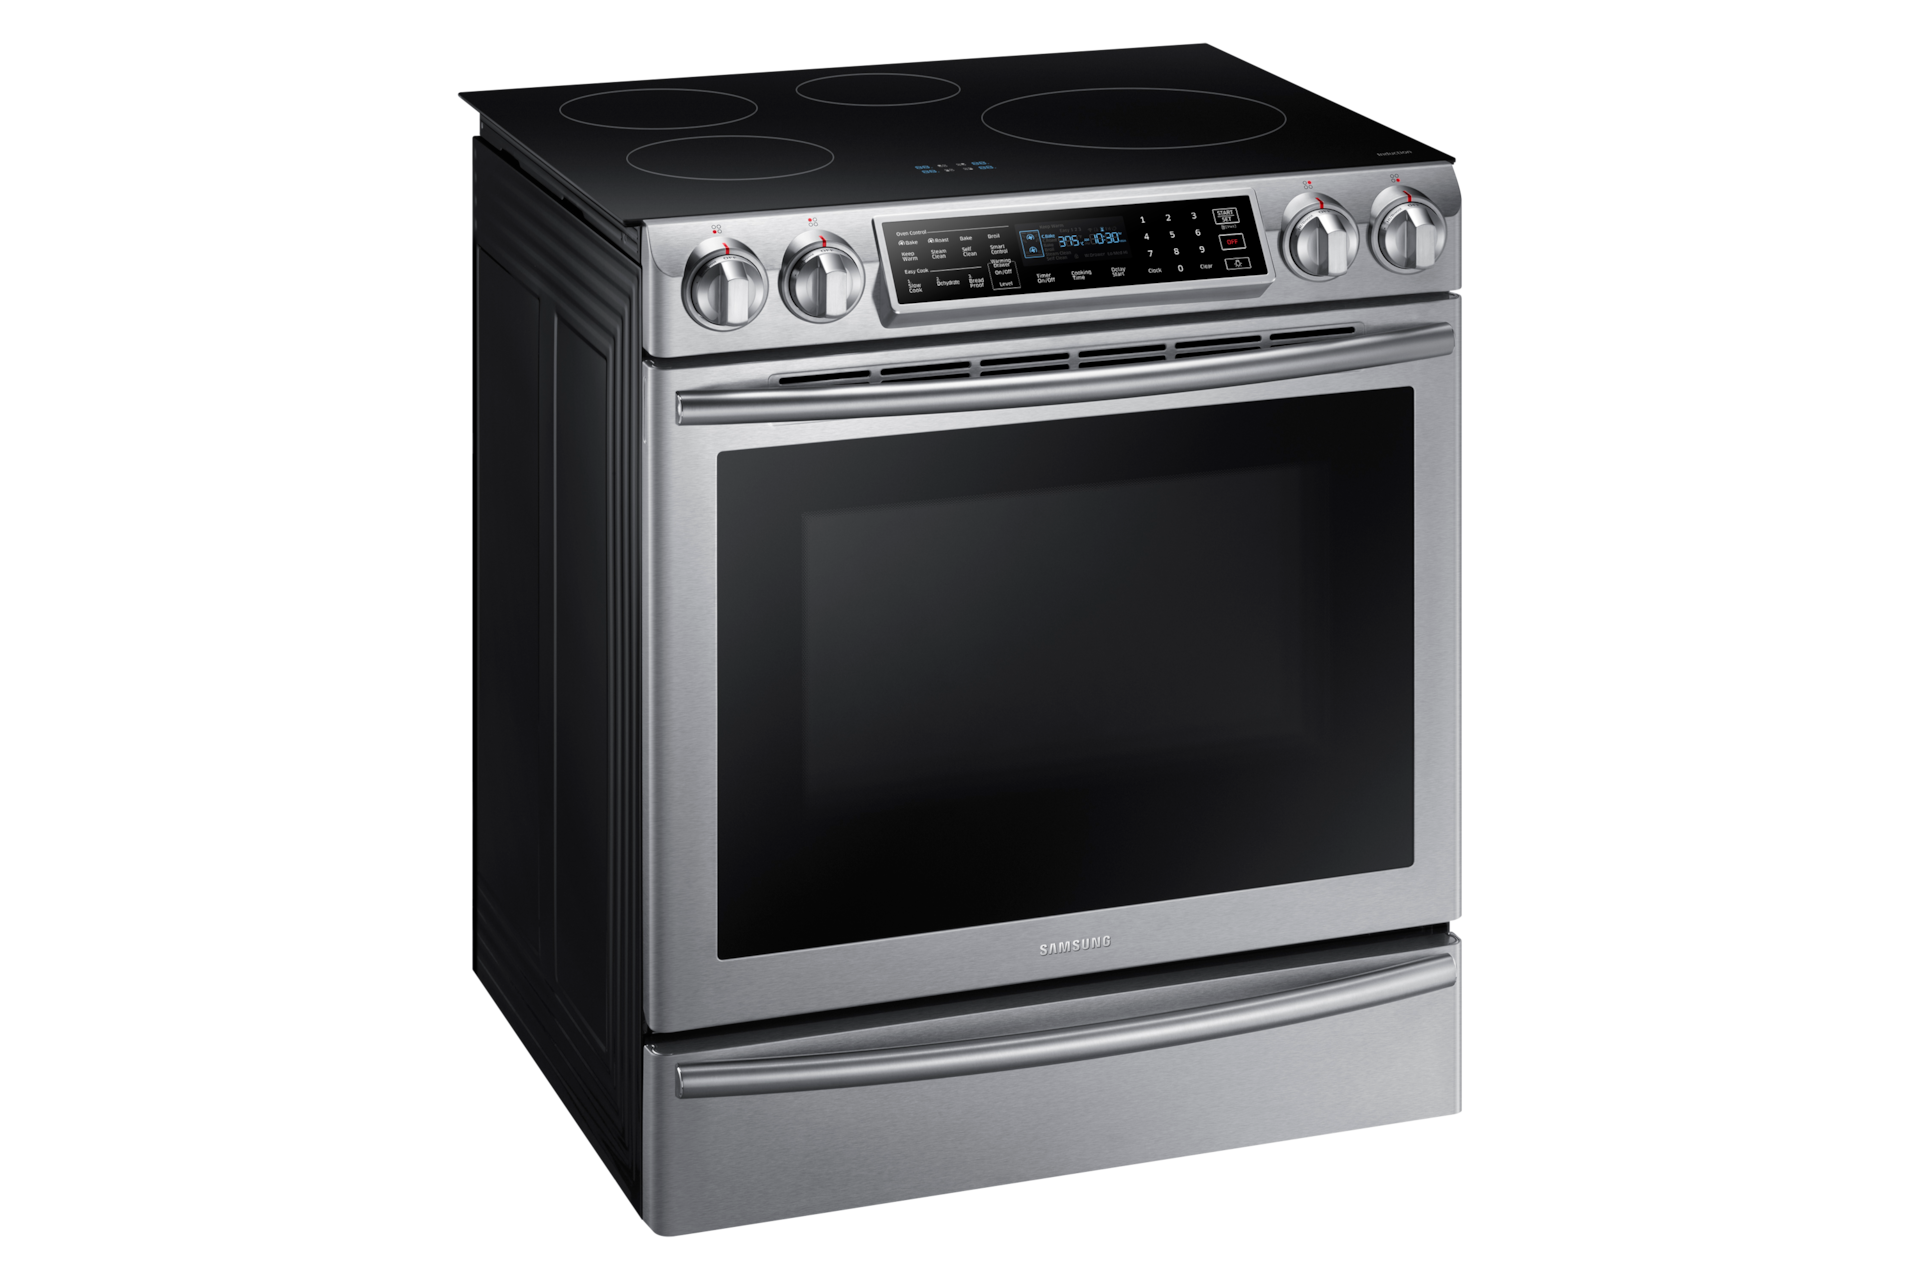 NE9900H Induction Range with Virtual Flame Technology™, 5.8 cu.ft. | SAMSUNG Canada3000 x 2000